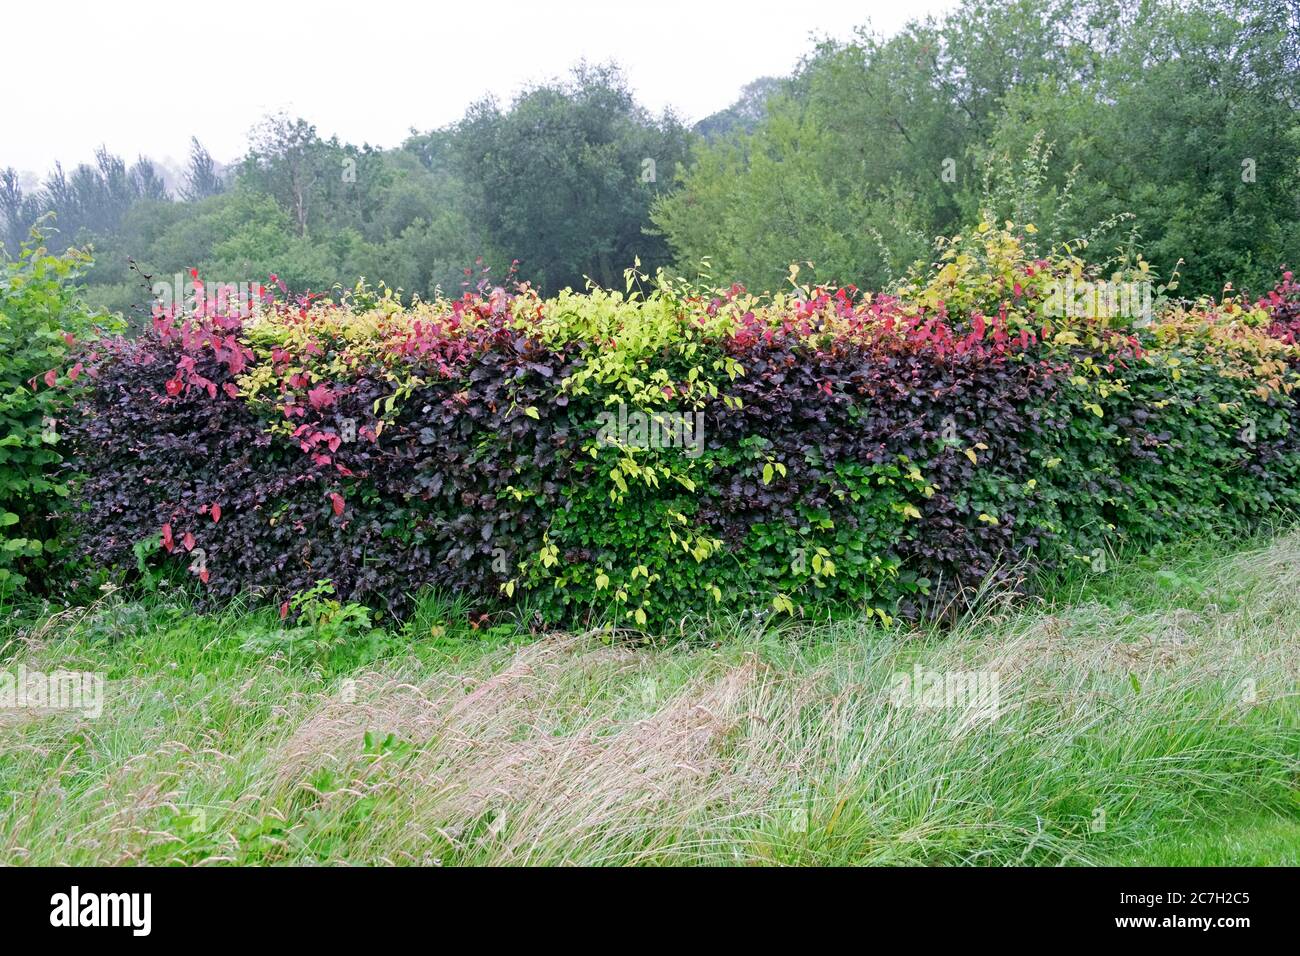 Red and green leaves of a beech hedge in July, summer and long grass of lawn allowed to grow on a rainy day in Carmarthenshire Wales UK  KATHY DEWITT Stock Photo